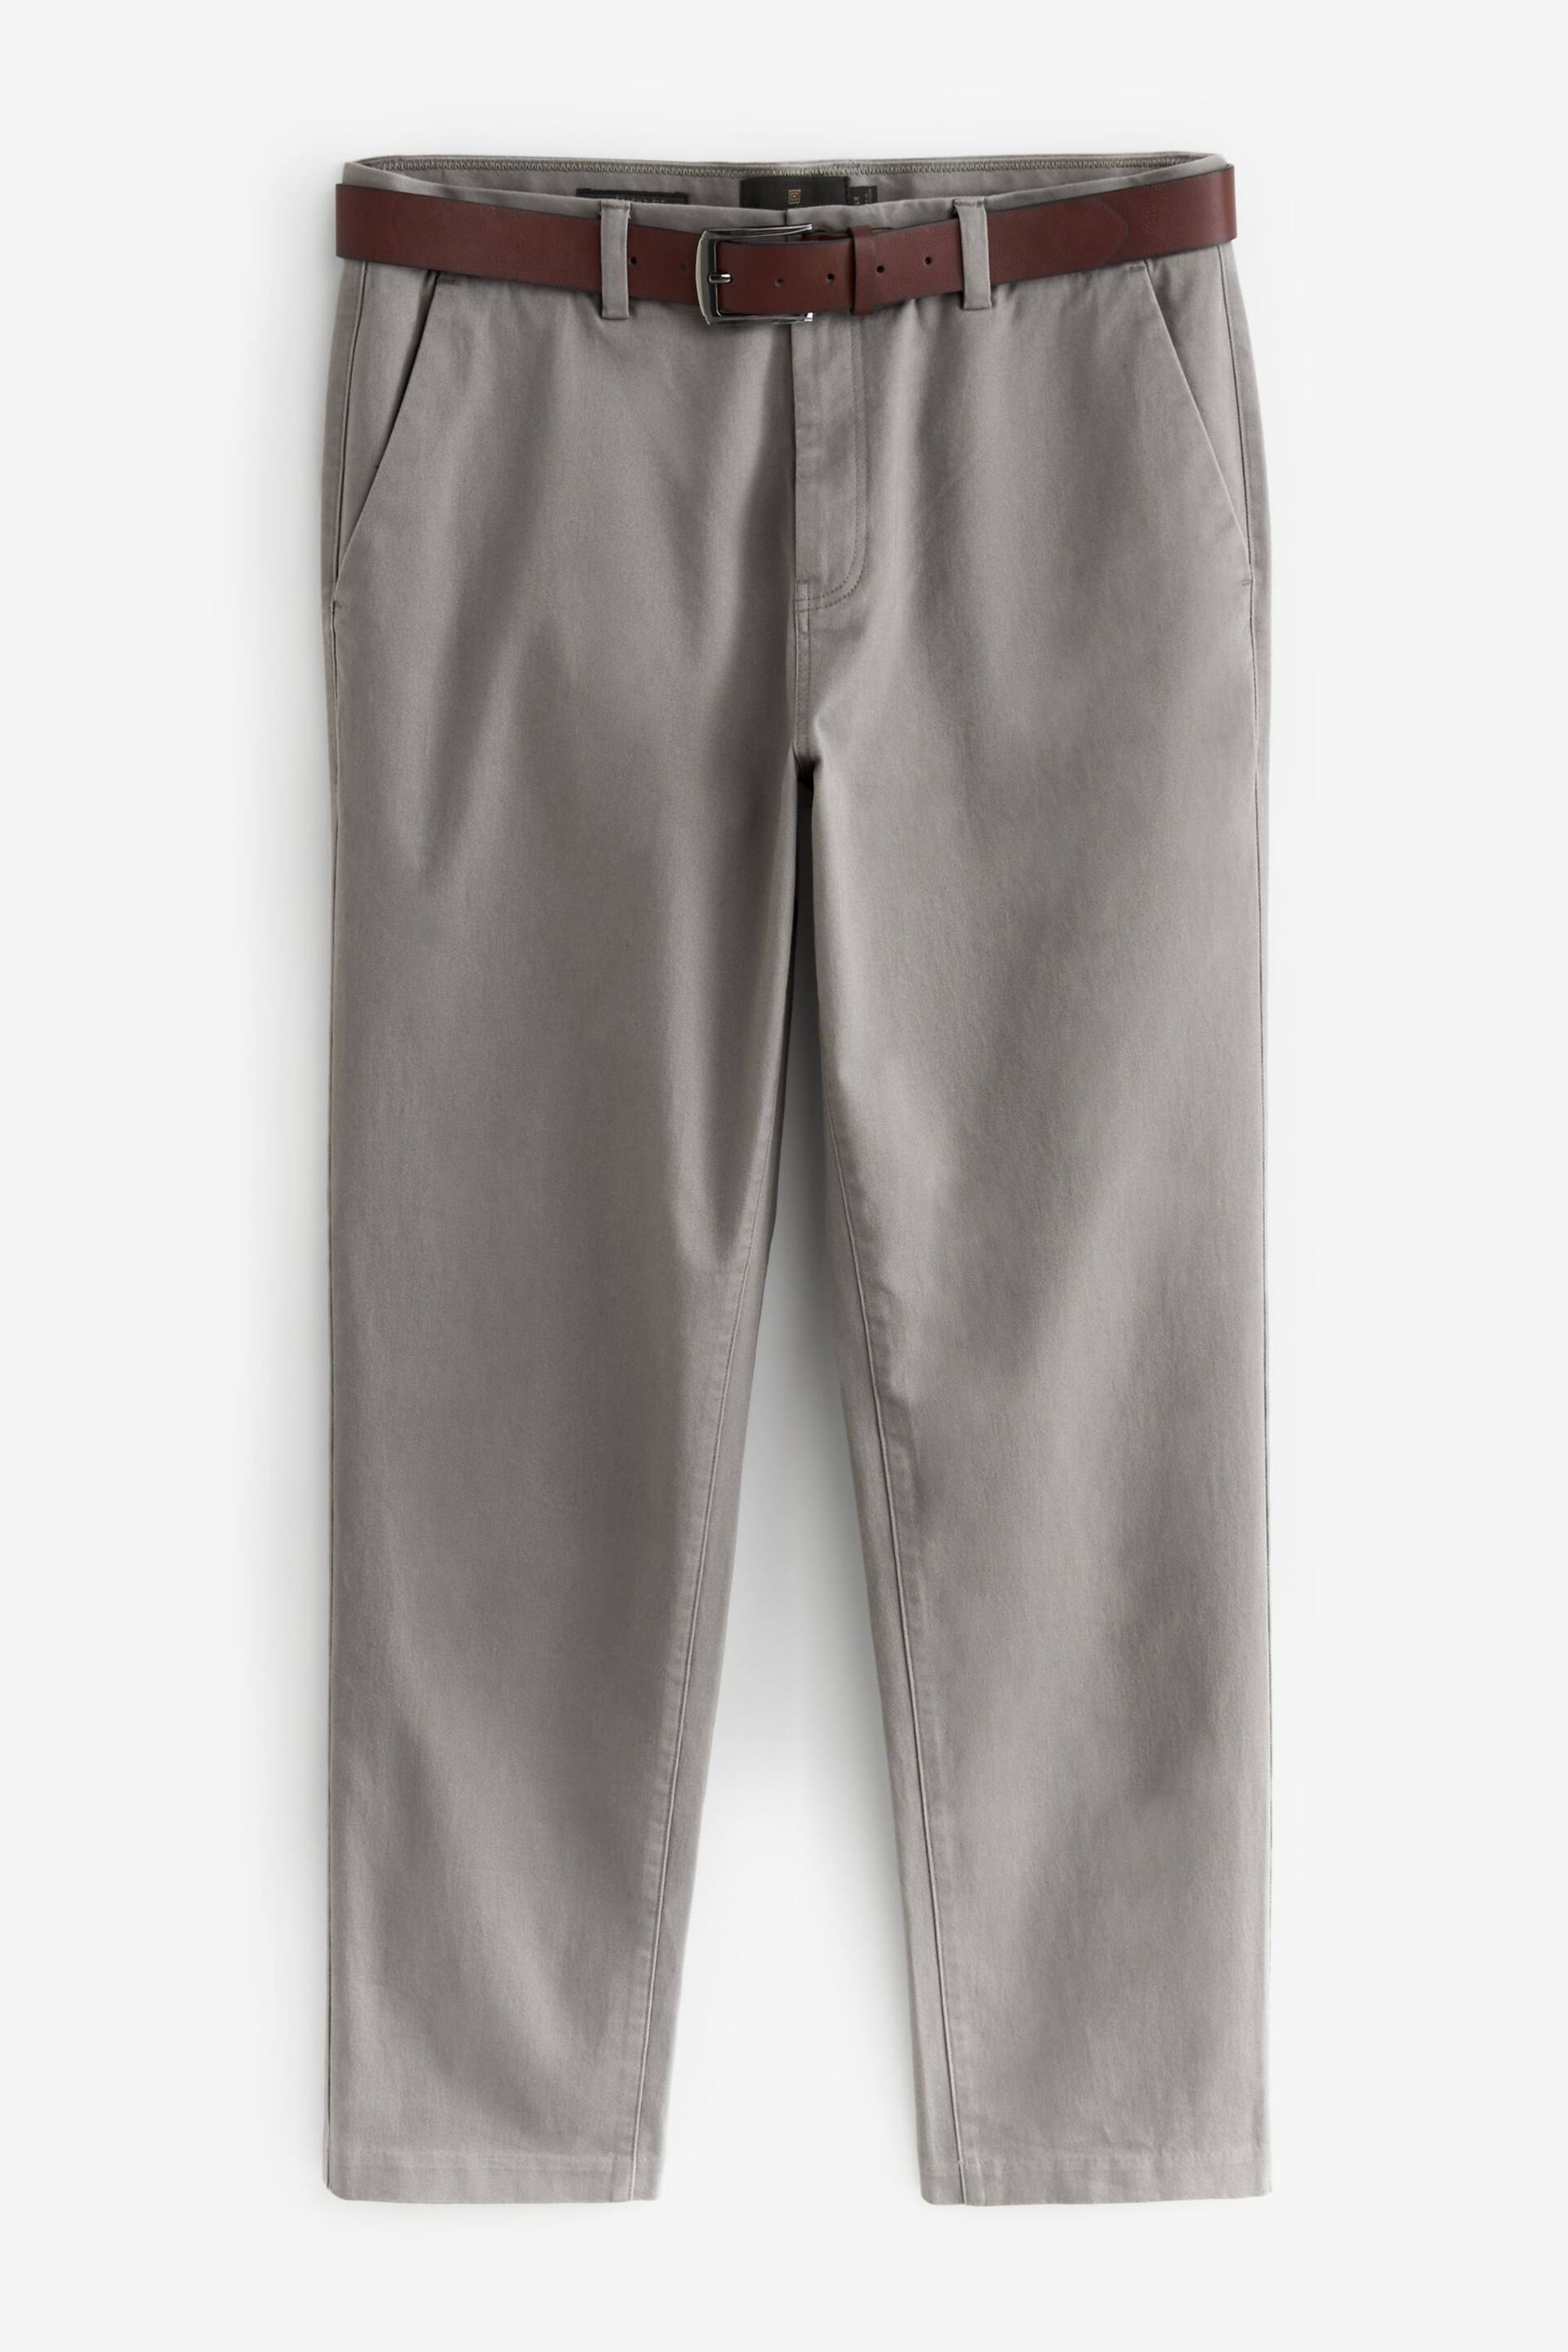 Grey Straight Fit Belted Soft Touch Chino Trousers - Image 7 of 10